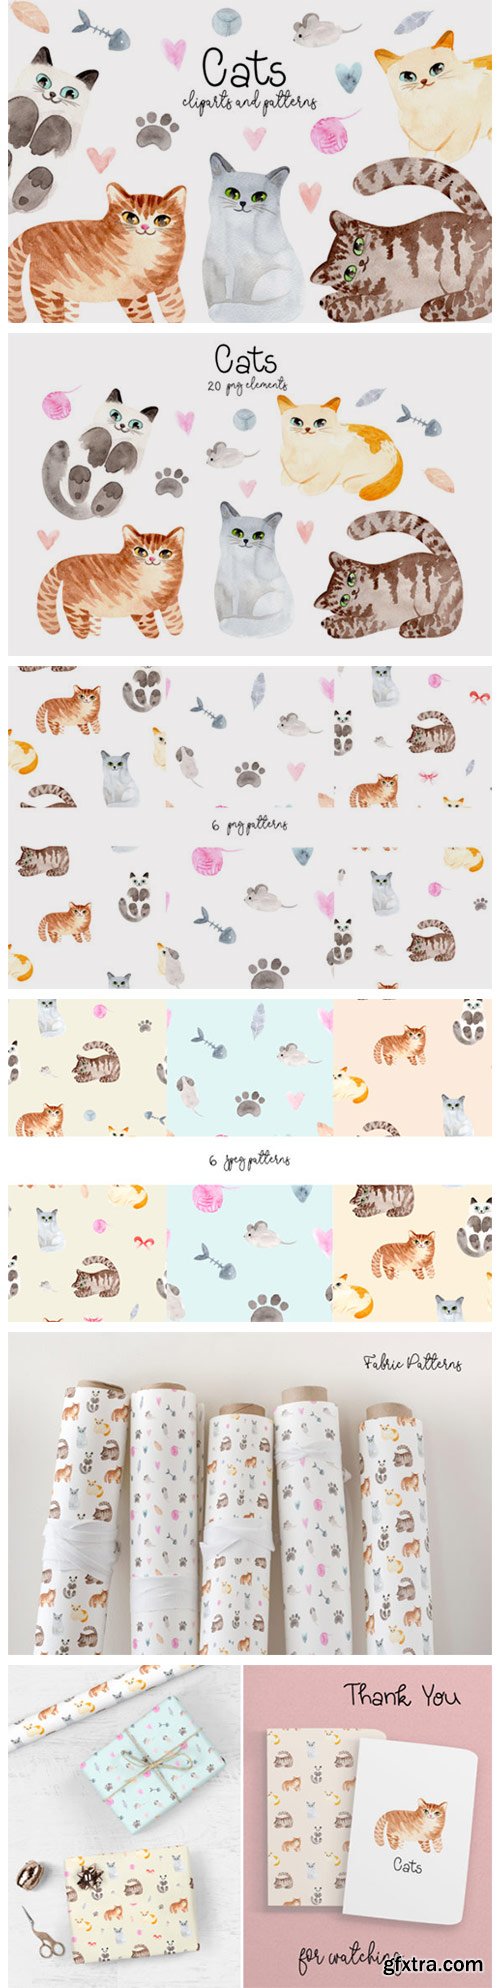 Watercolor Cute Cats. Patterns, Cliparts 4107501